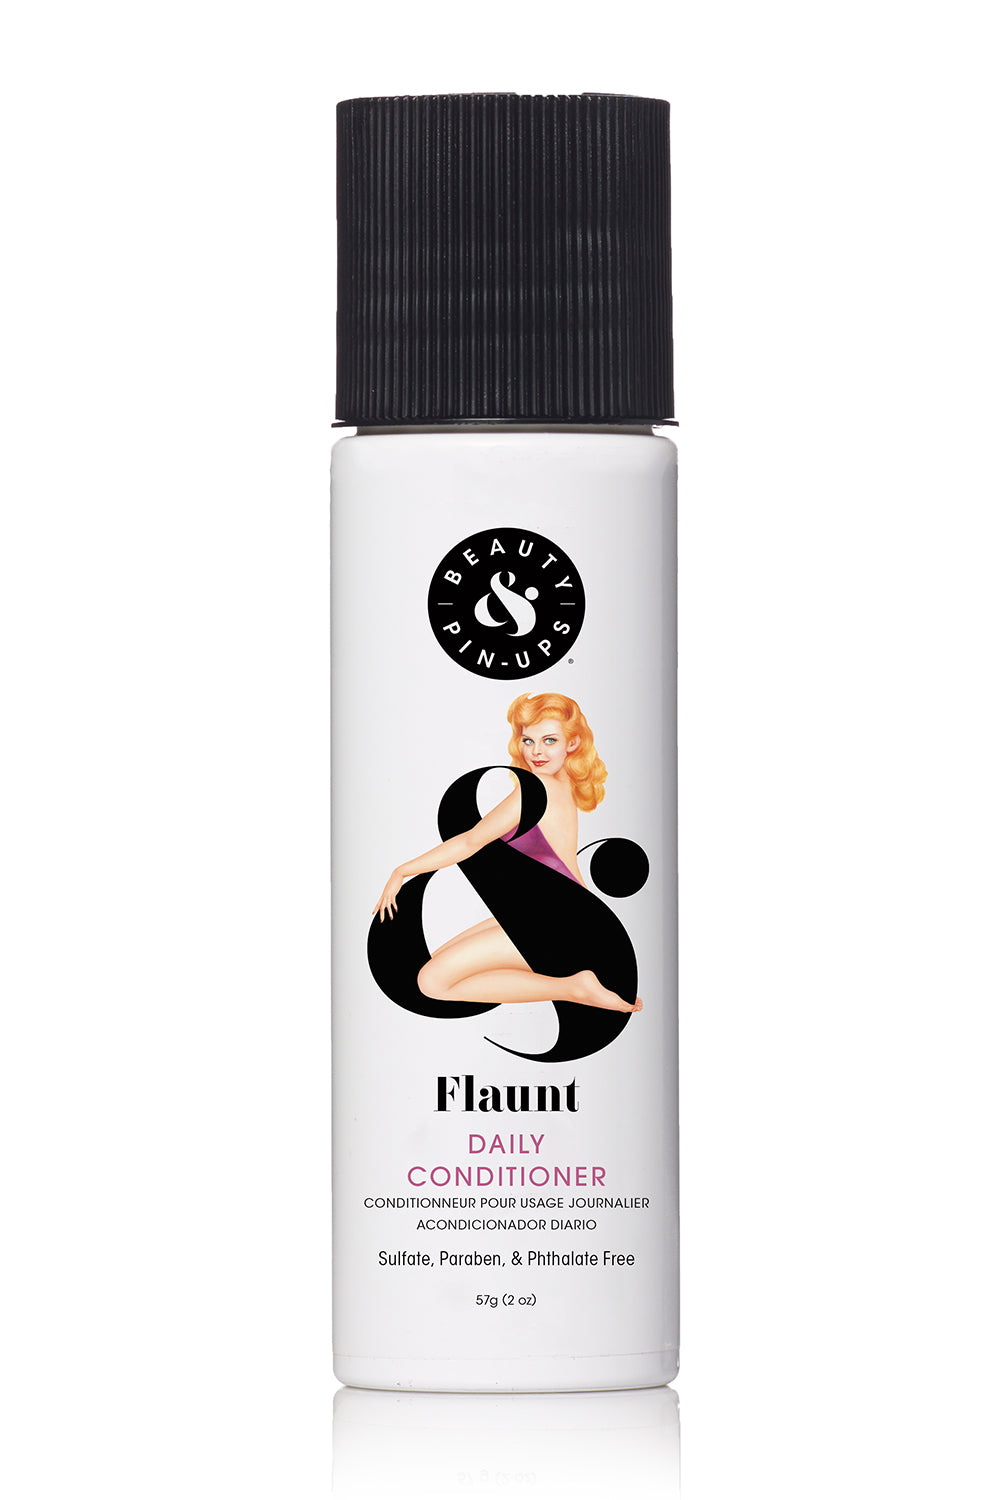 Case of Flaunt Daily Conditioner